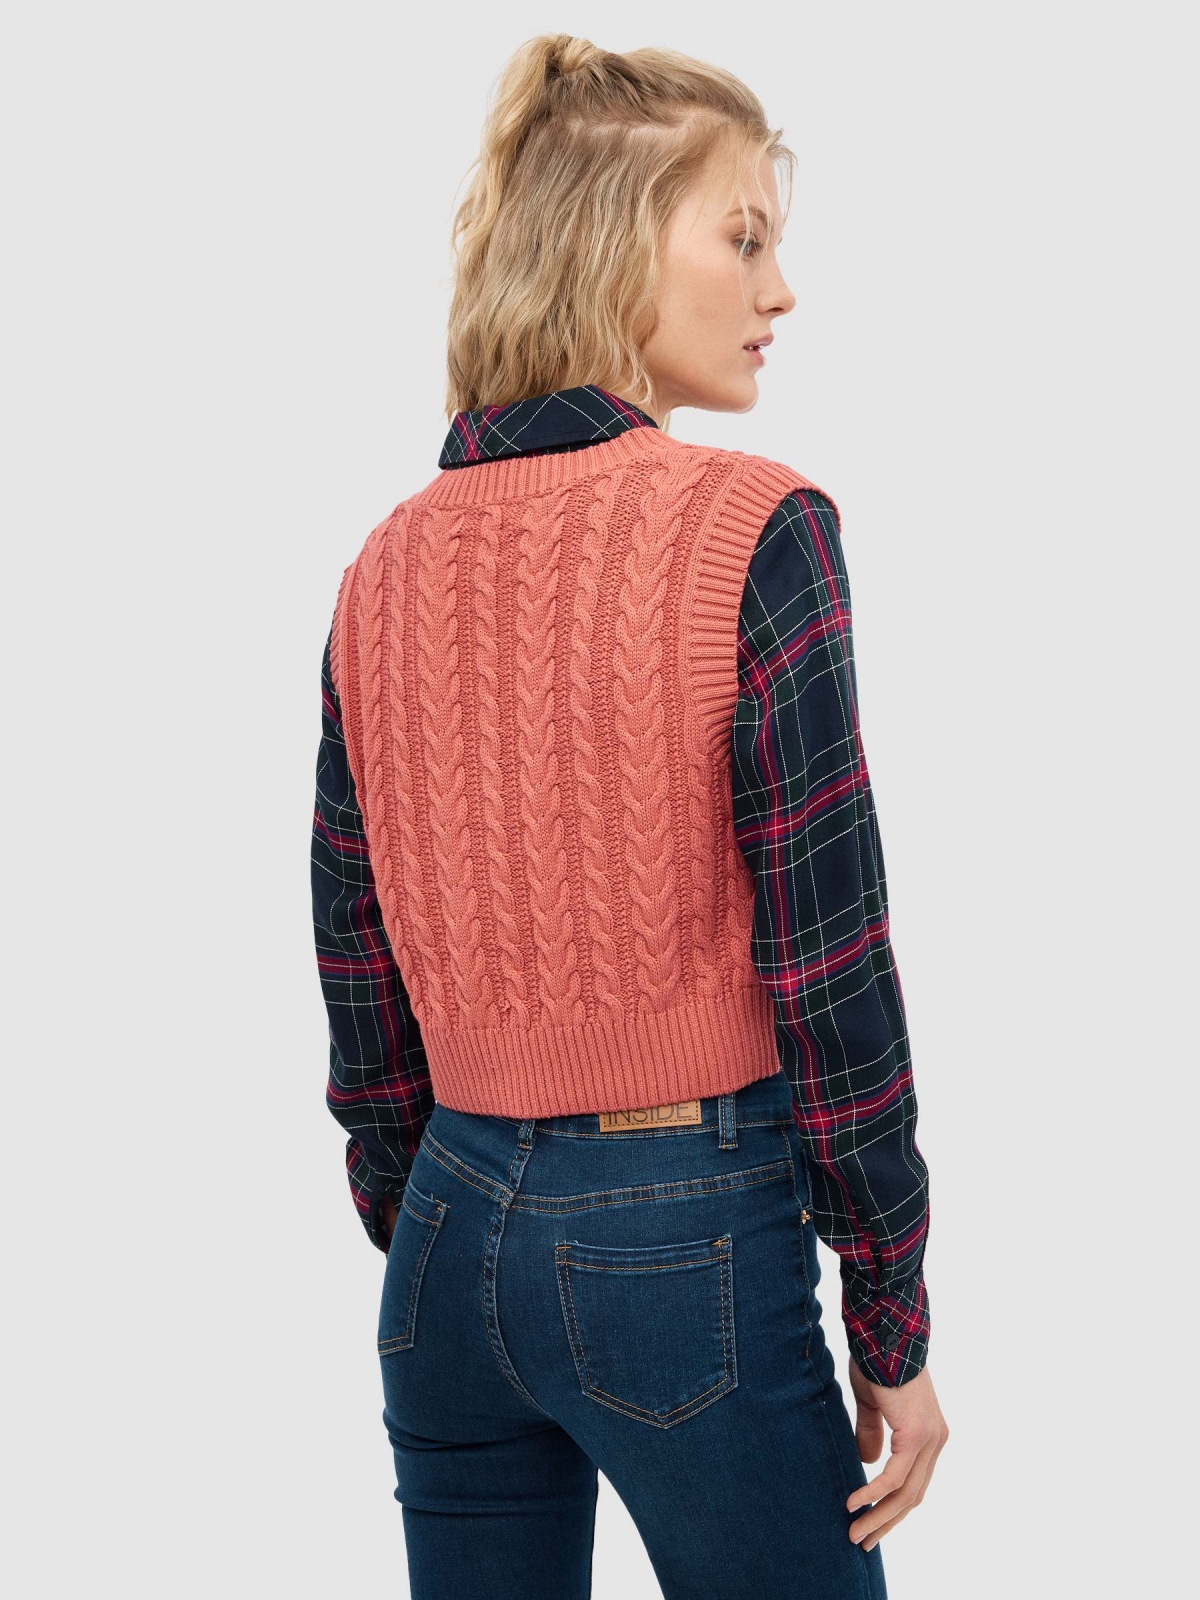 Vest of eights red middle back view